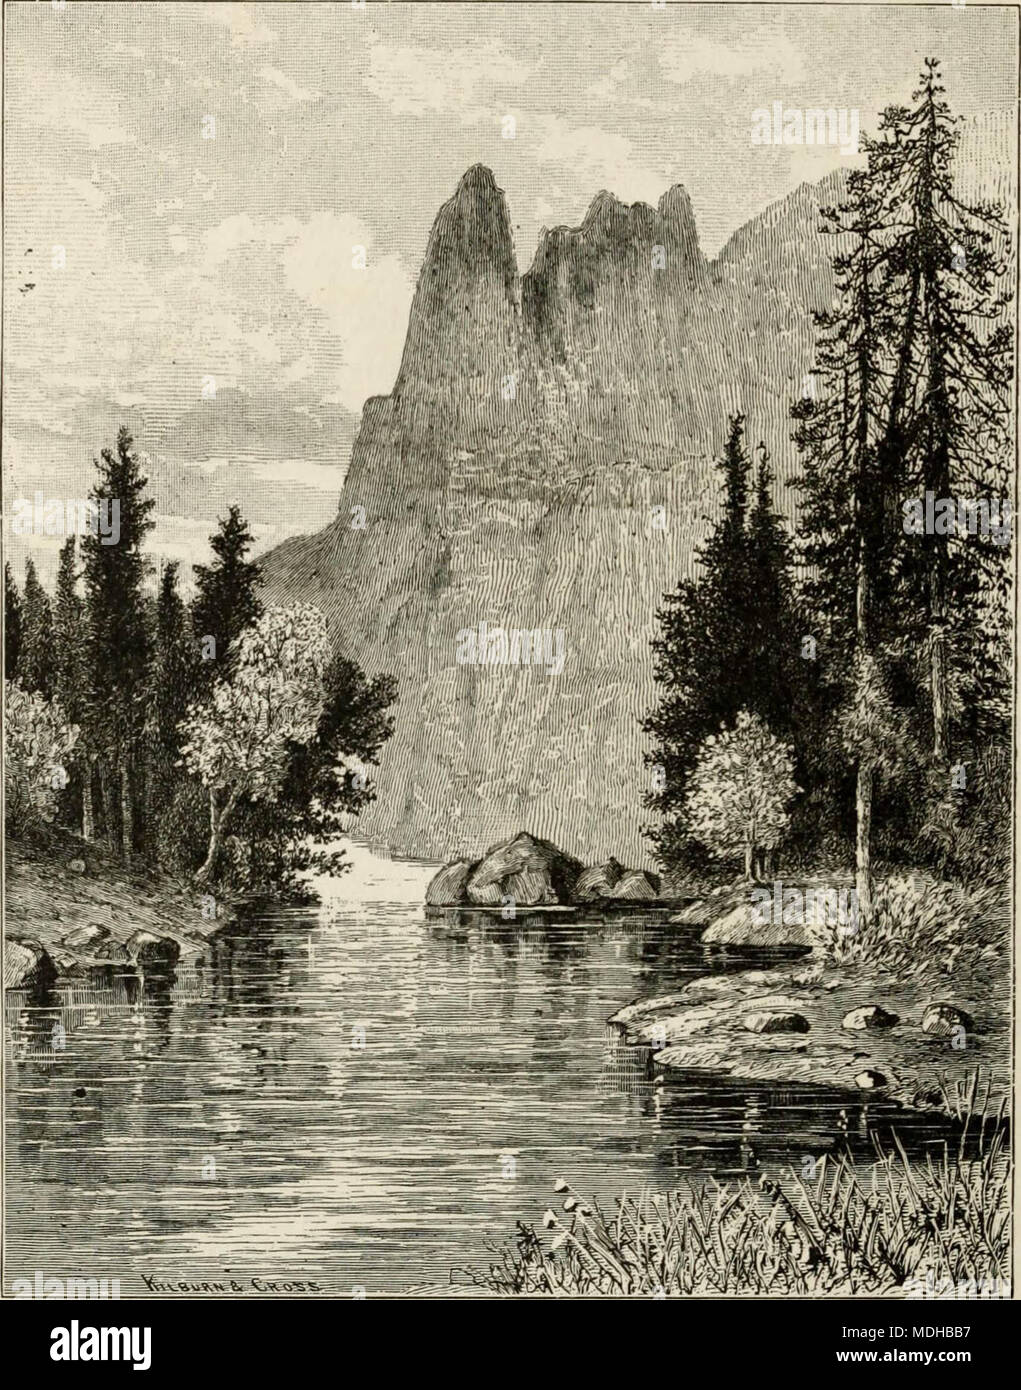 Marvels of the new West : a vivid portrayal of the stupendous marvels in the vast wonderland west of the Missouri River : comprising marvels of nature, marvels of race, marvels of enterprise, marvels of mining, marvels of stock-raising, and marvels of agriculture, graphically and truthfully described Stock Photo